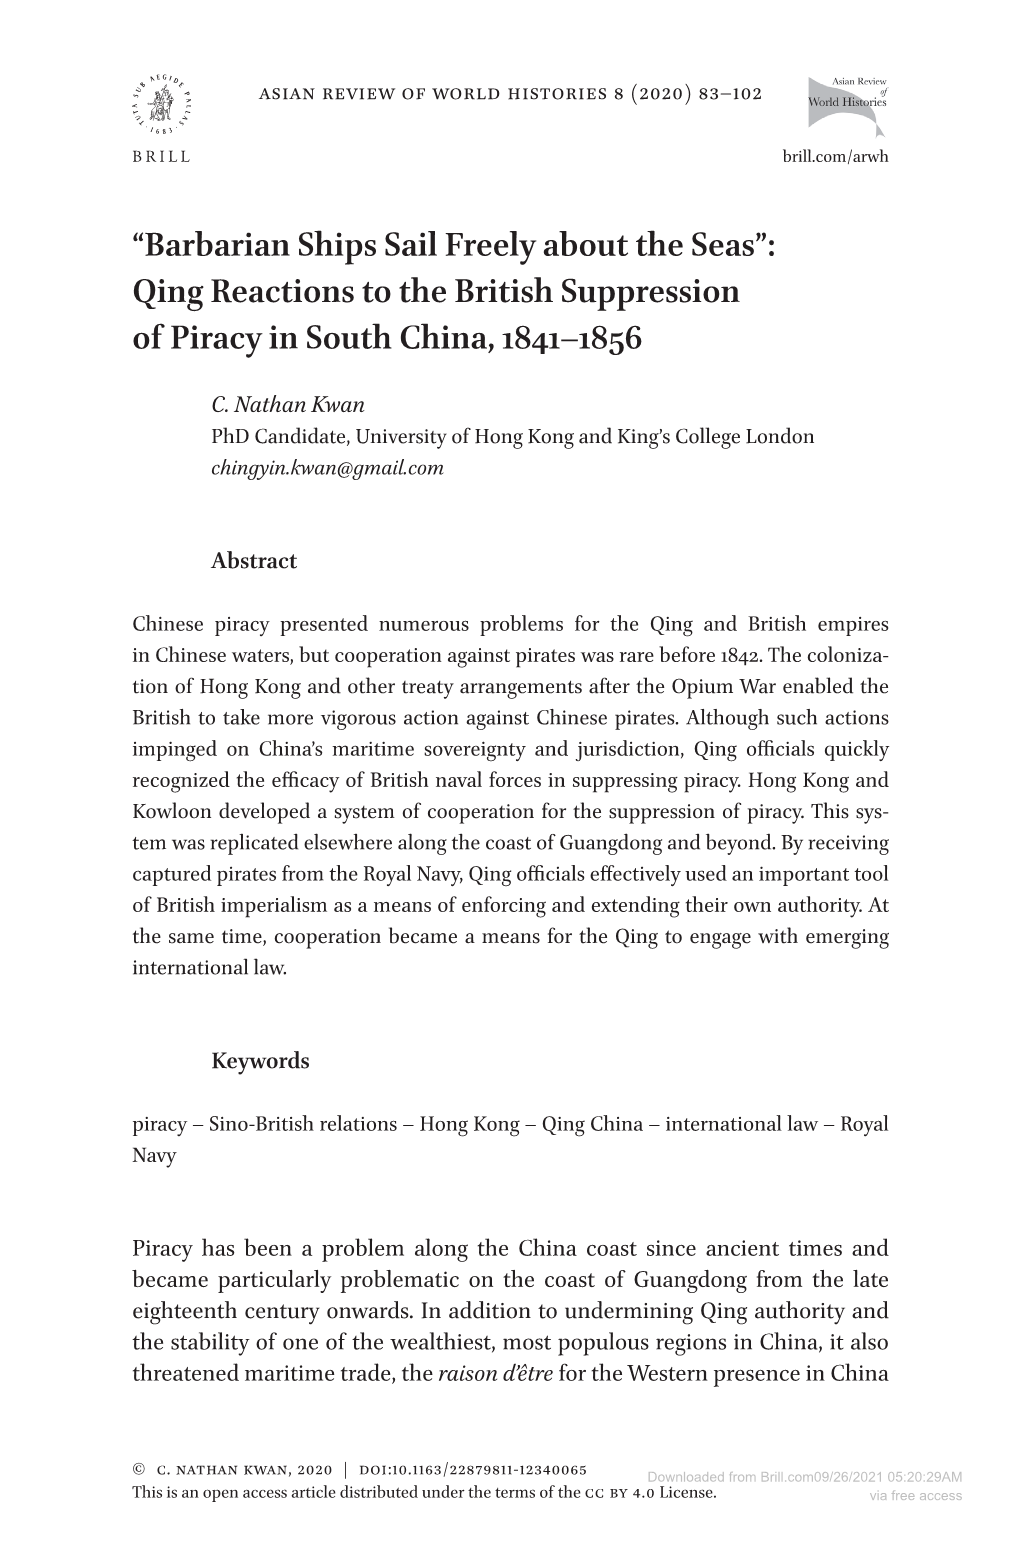 “Barbarian Ships Sail Freely About the Seas”: Qing Reactions to the British Suppression of Piracy in South China, 1841–1856